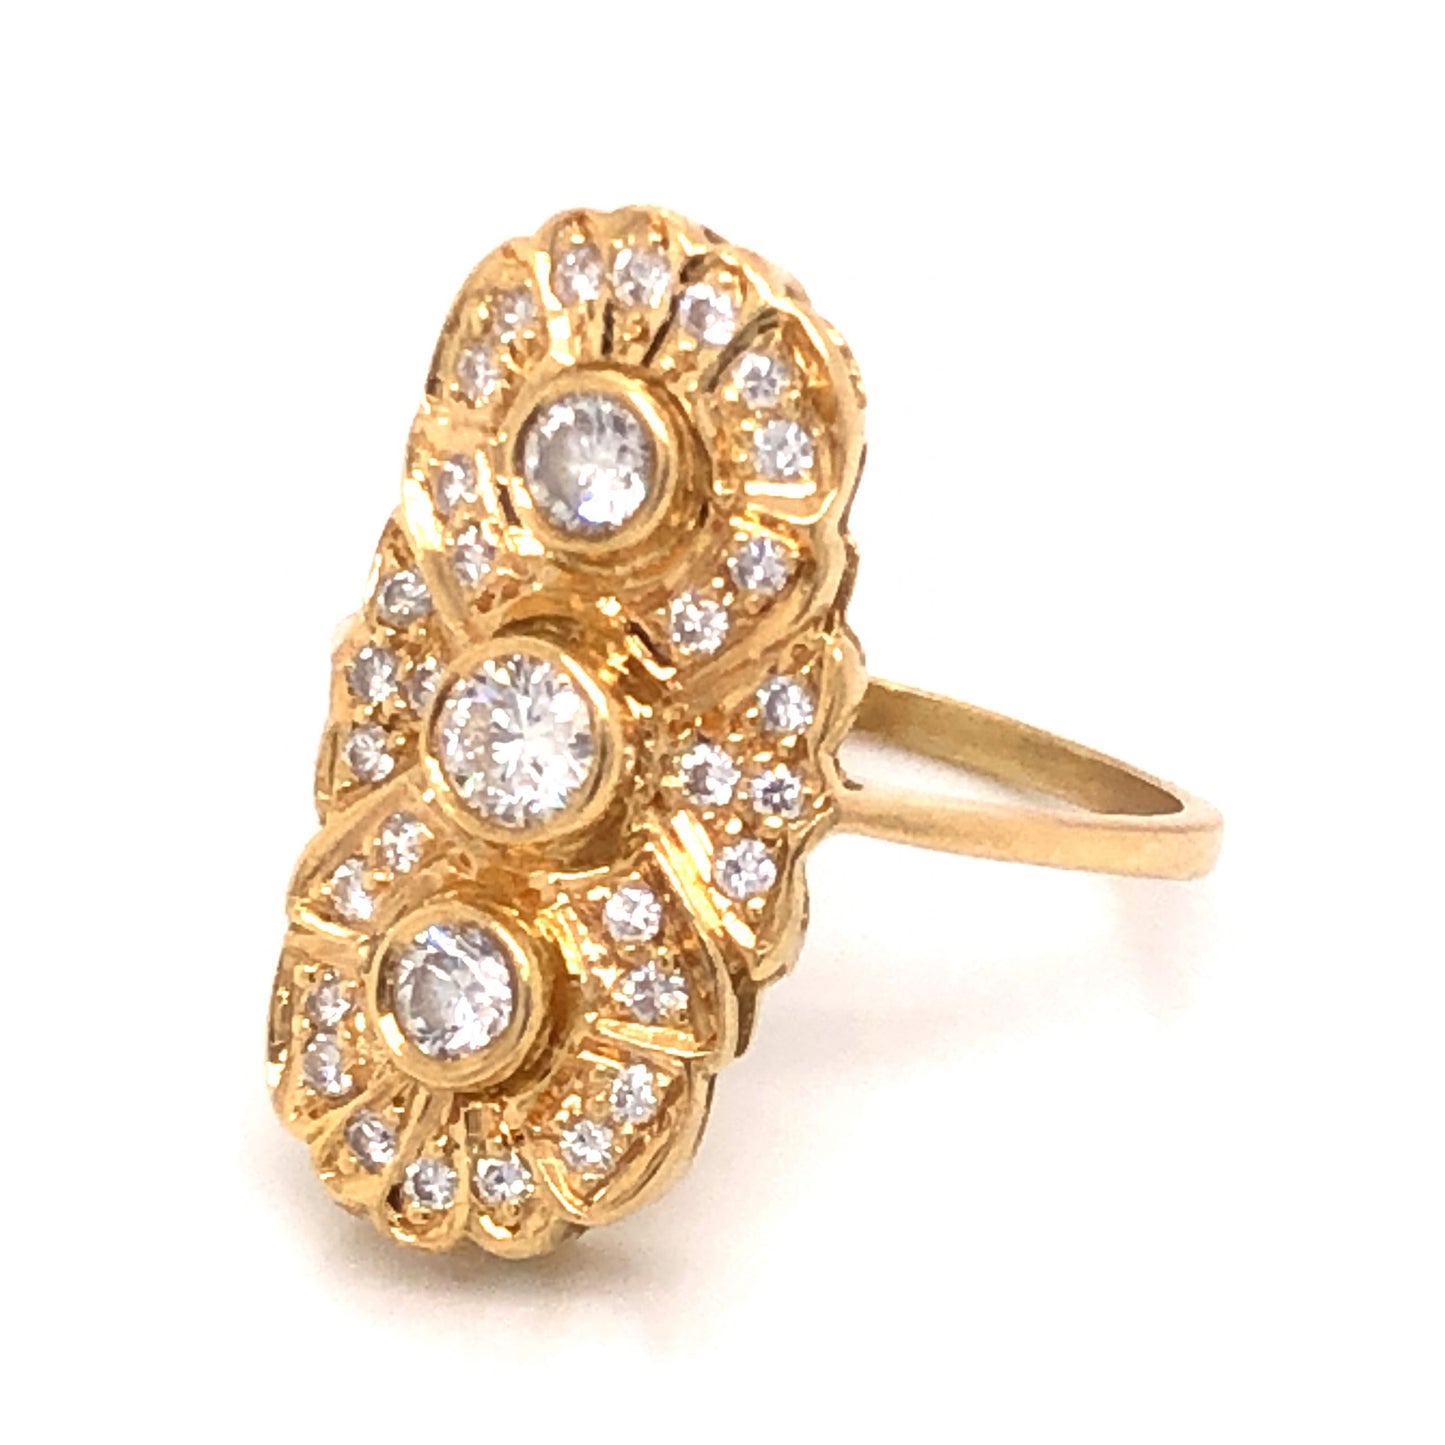 Art Deco Style Diamond Cocktail Ring in 14K Yellow Gold